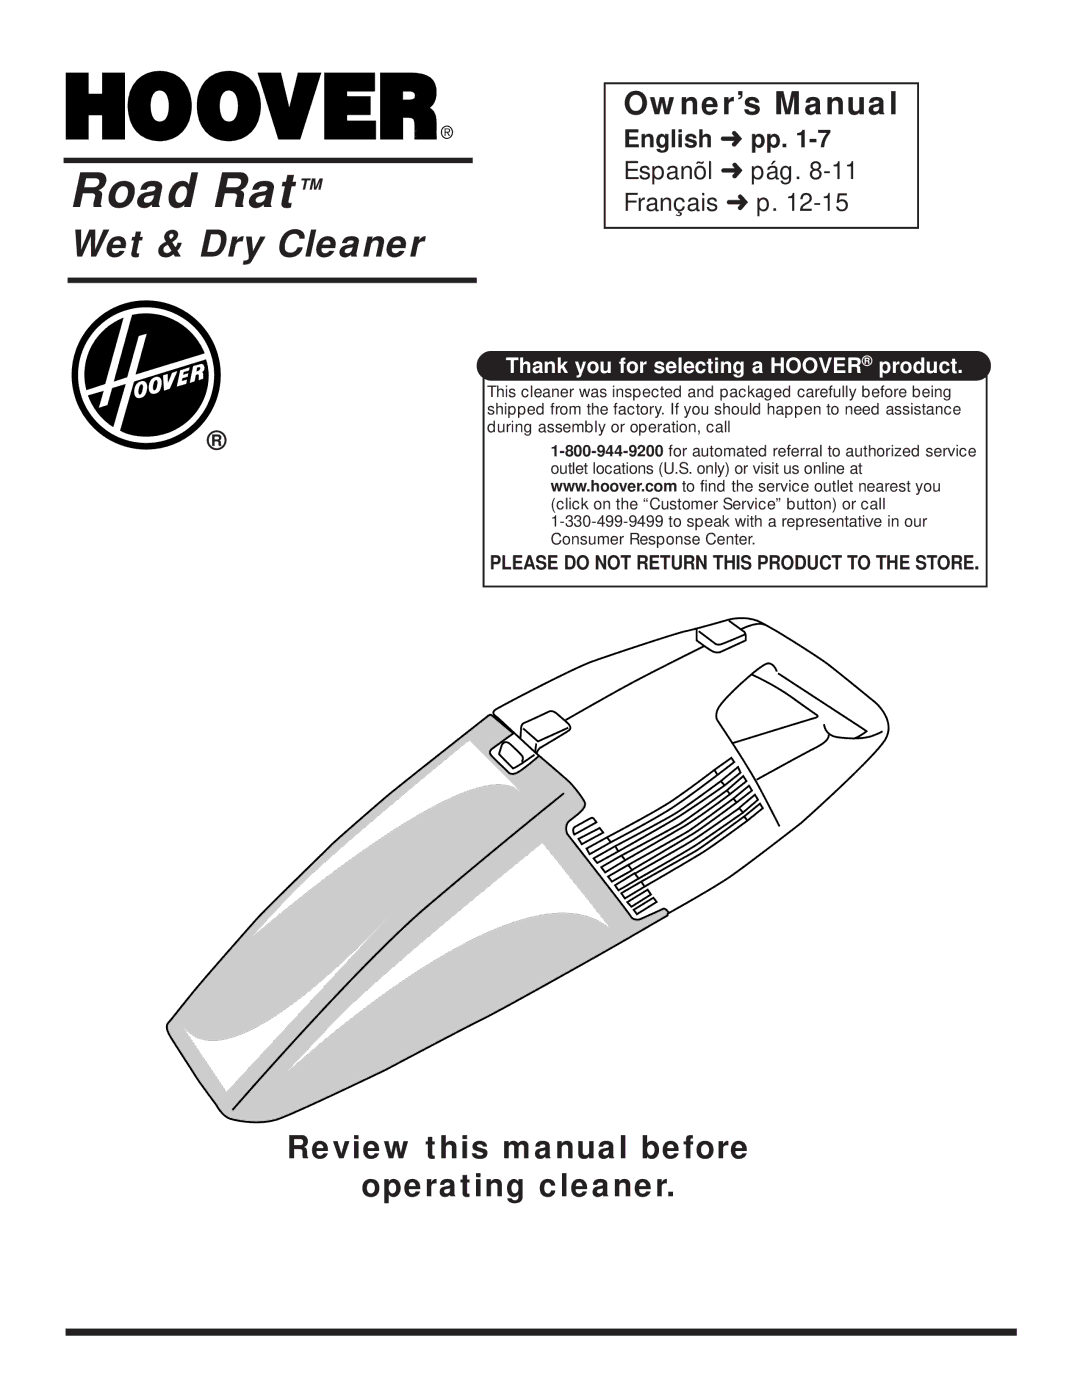 Hoover Road Rat Wet & Dry Cleaner owner manual Review this manual before Operating cleaner 